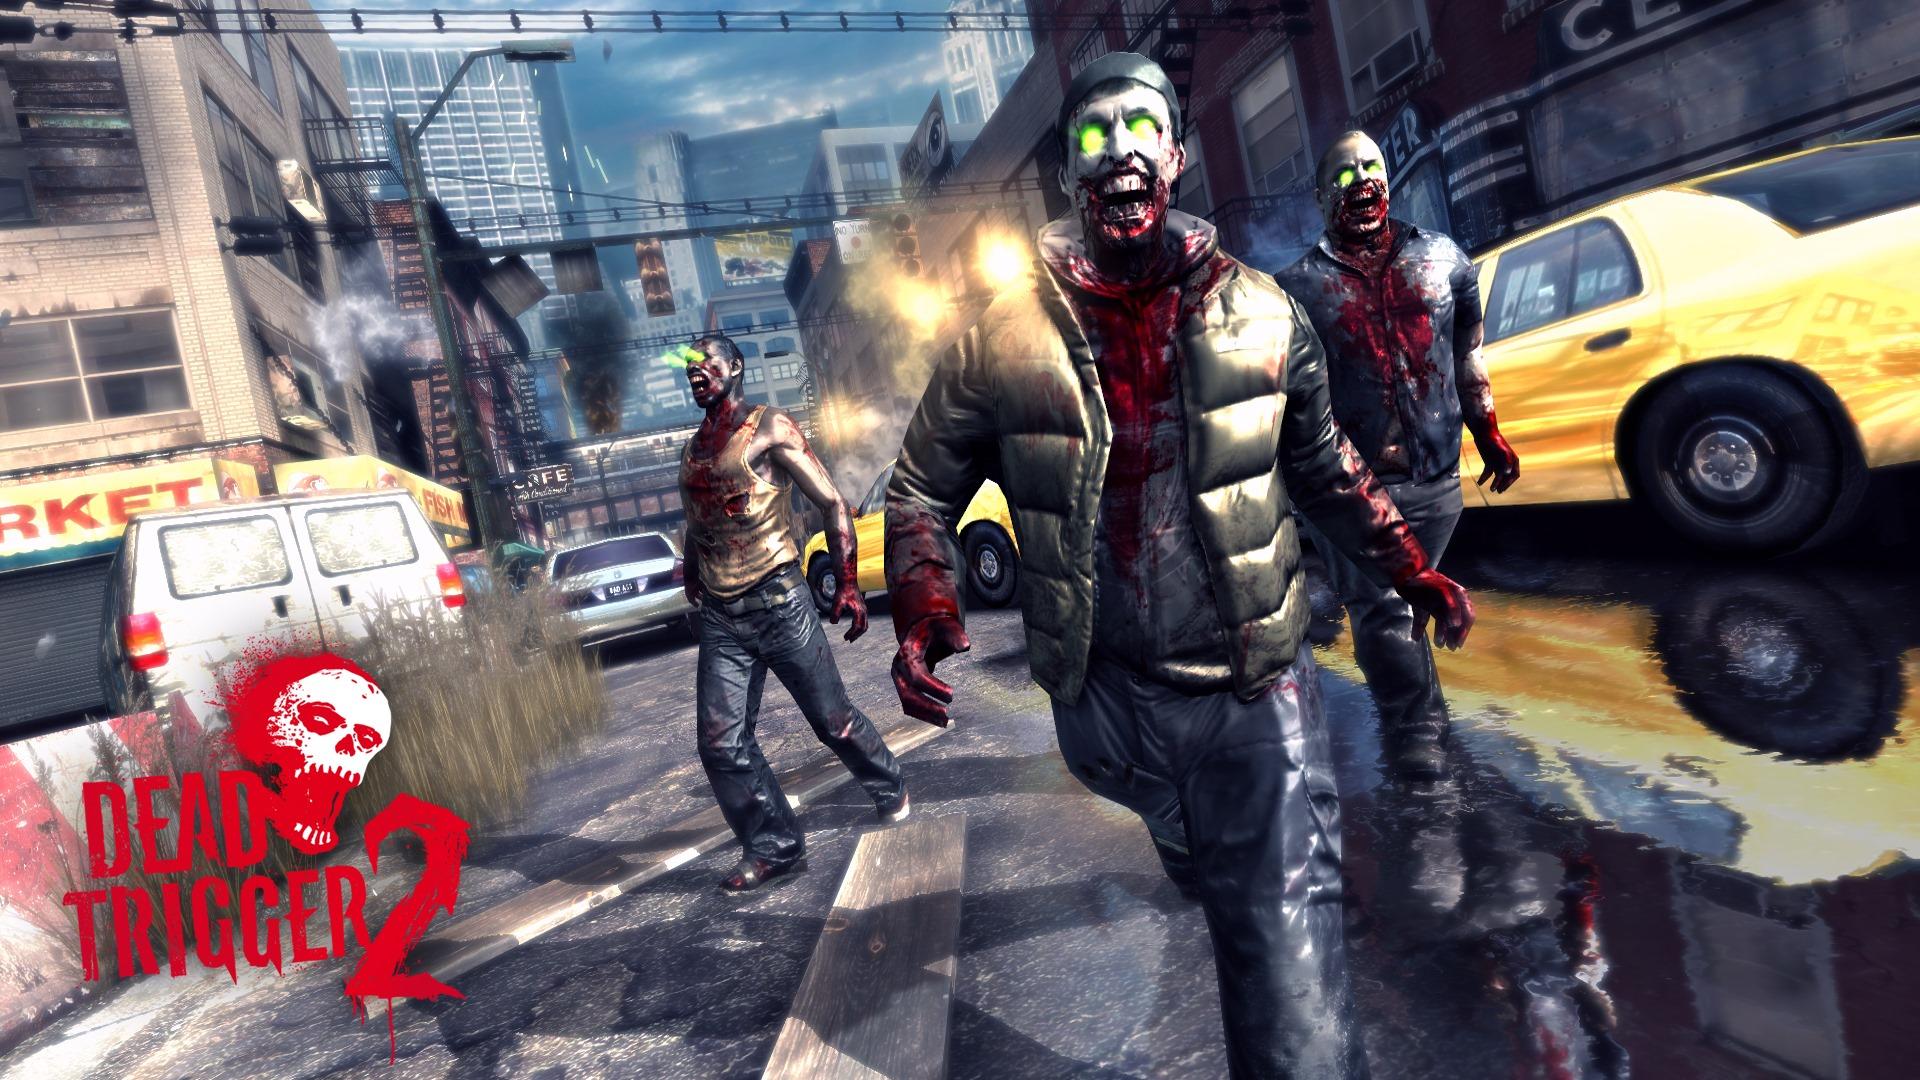 Dead Trigger 2 Gets An Update To 0.2.5 With New Missions